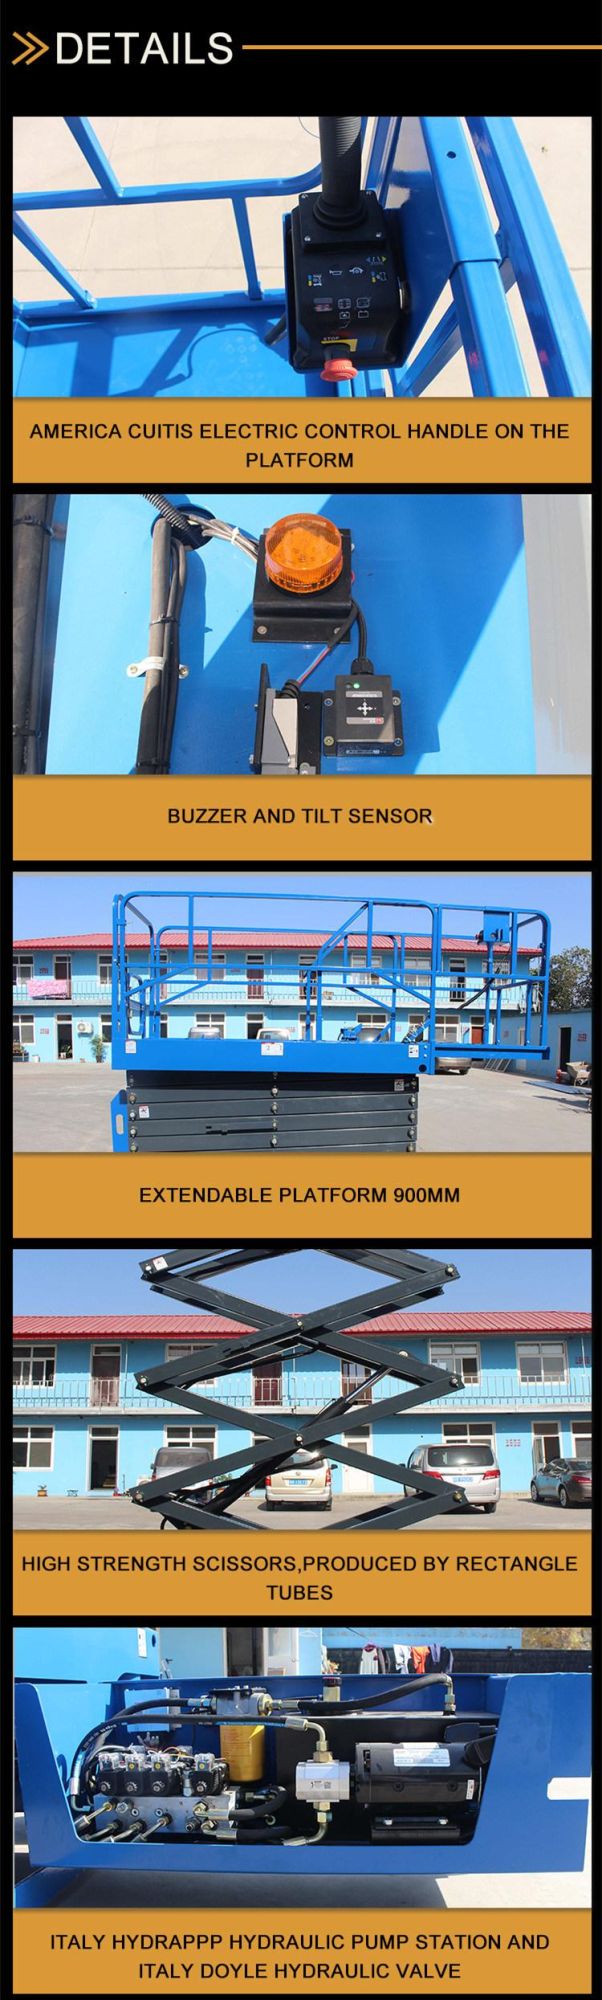 6m-14m Mobile Electric Scissor Table Cargo Hydraulic Self Propelled Pallet Material Handling Lifter